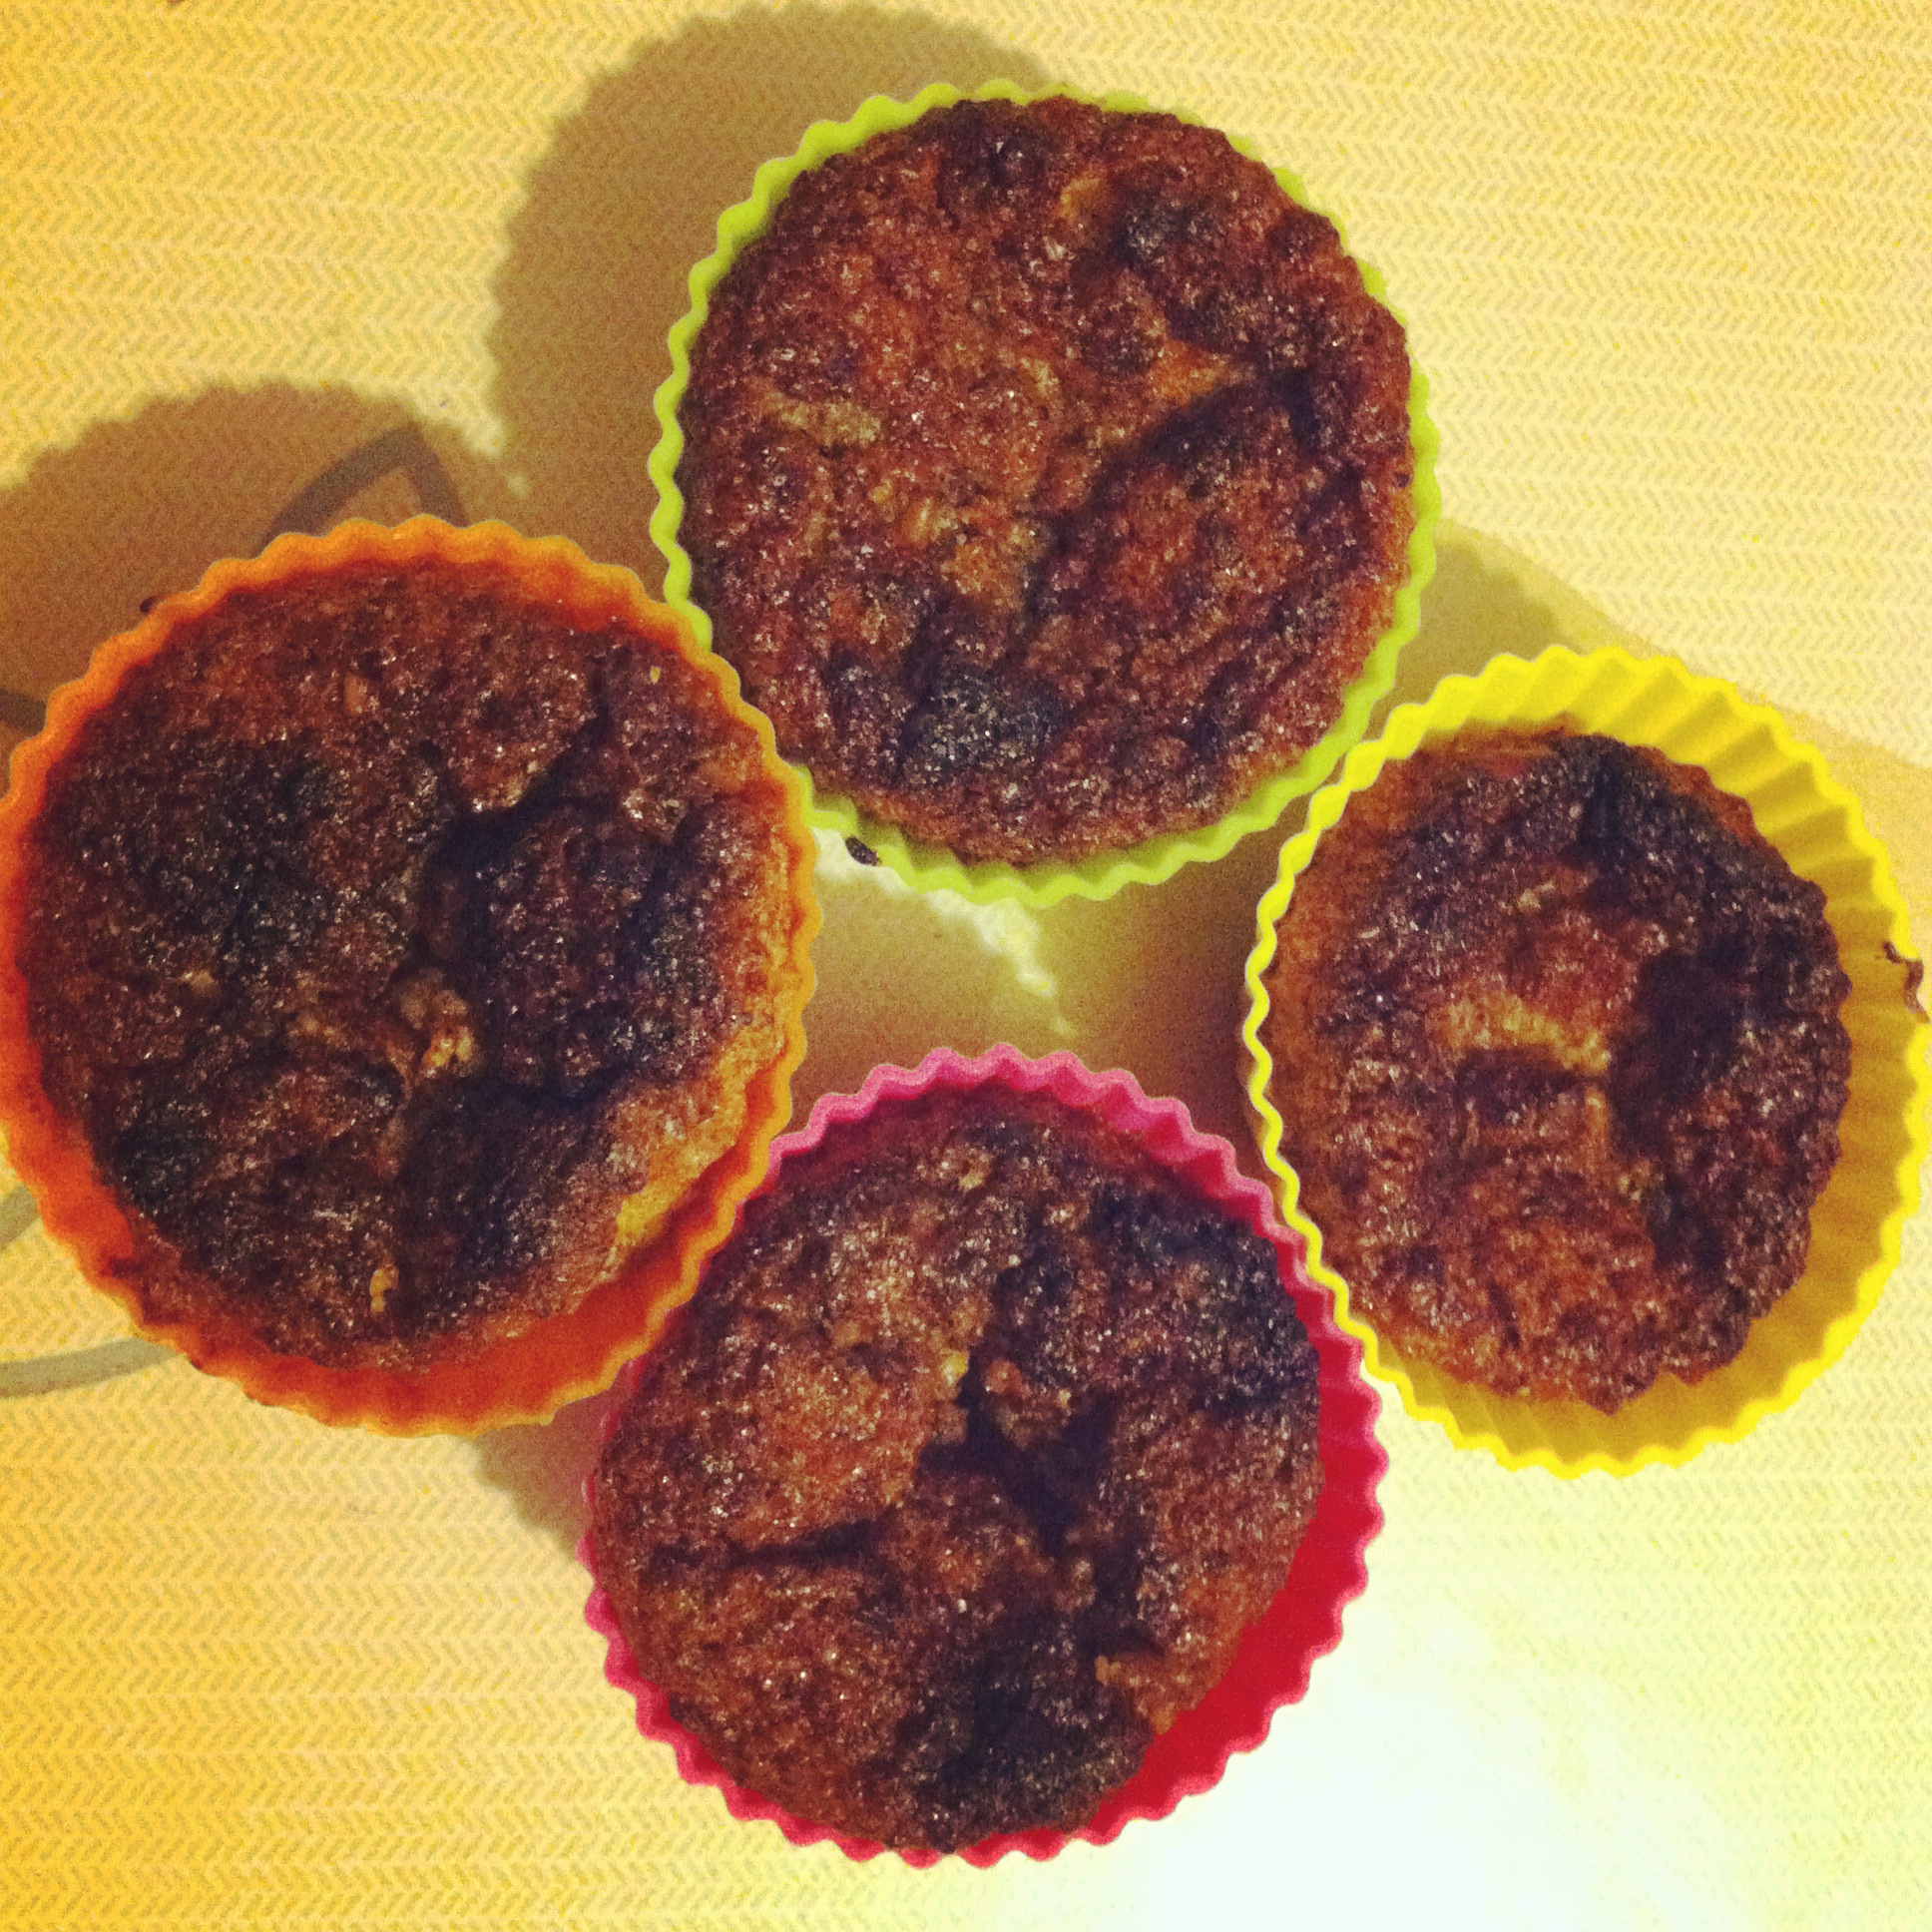 Sunflower, pecan and cardamon muffins, heart healthy, gluten free and yummy.